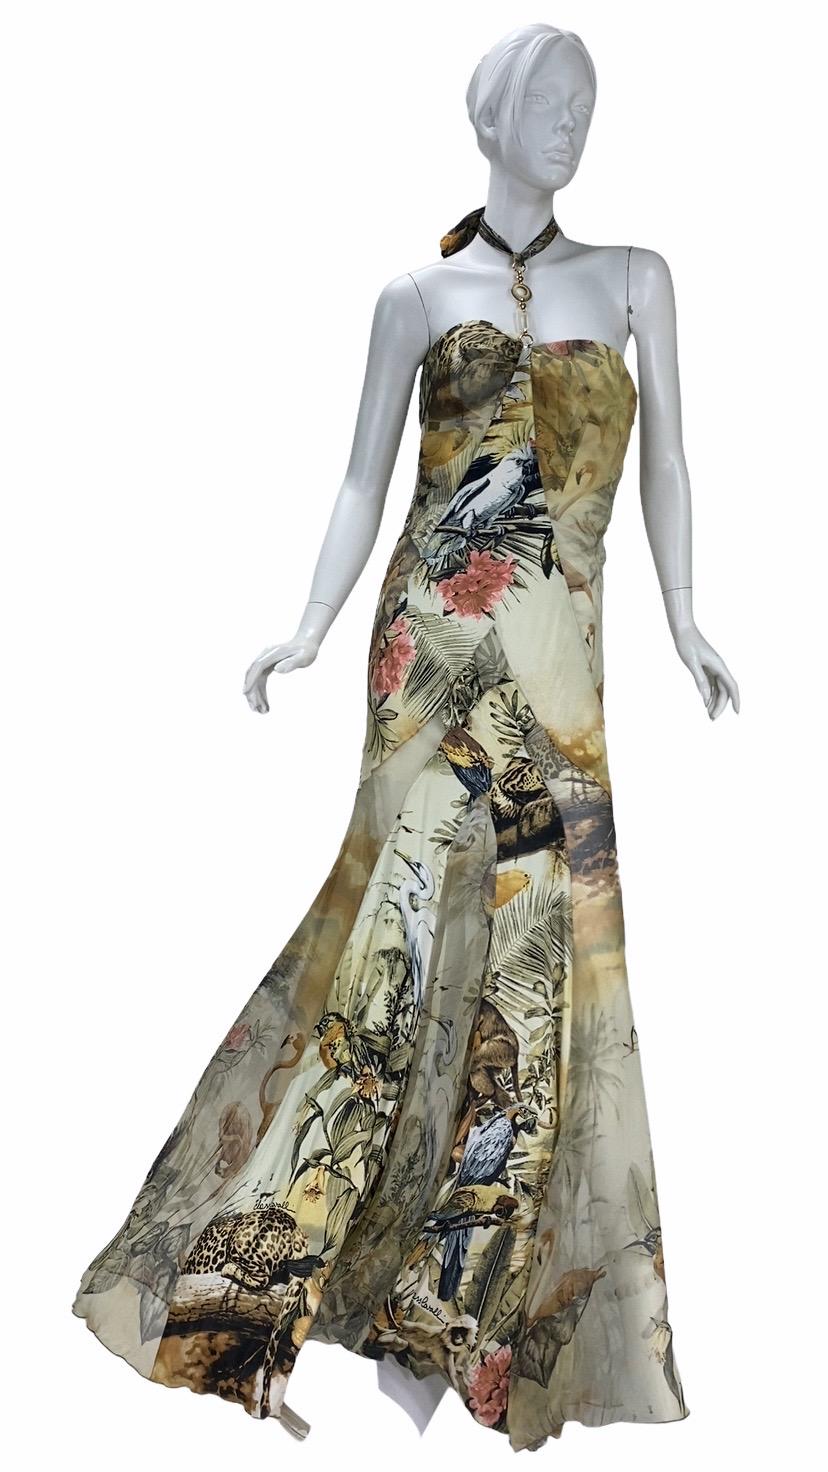 Roberto Cavalli Class
Jungle Print Silk Gown

IT Size 42

Incredible print 
Combination of smooth silk with semi sheer chiffon

Inner corset
Lining
Neck embellishment

Excellent condition

